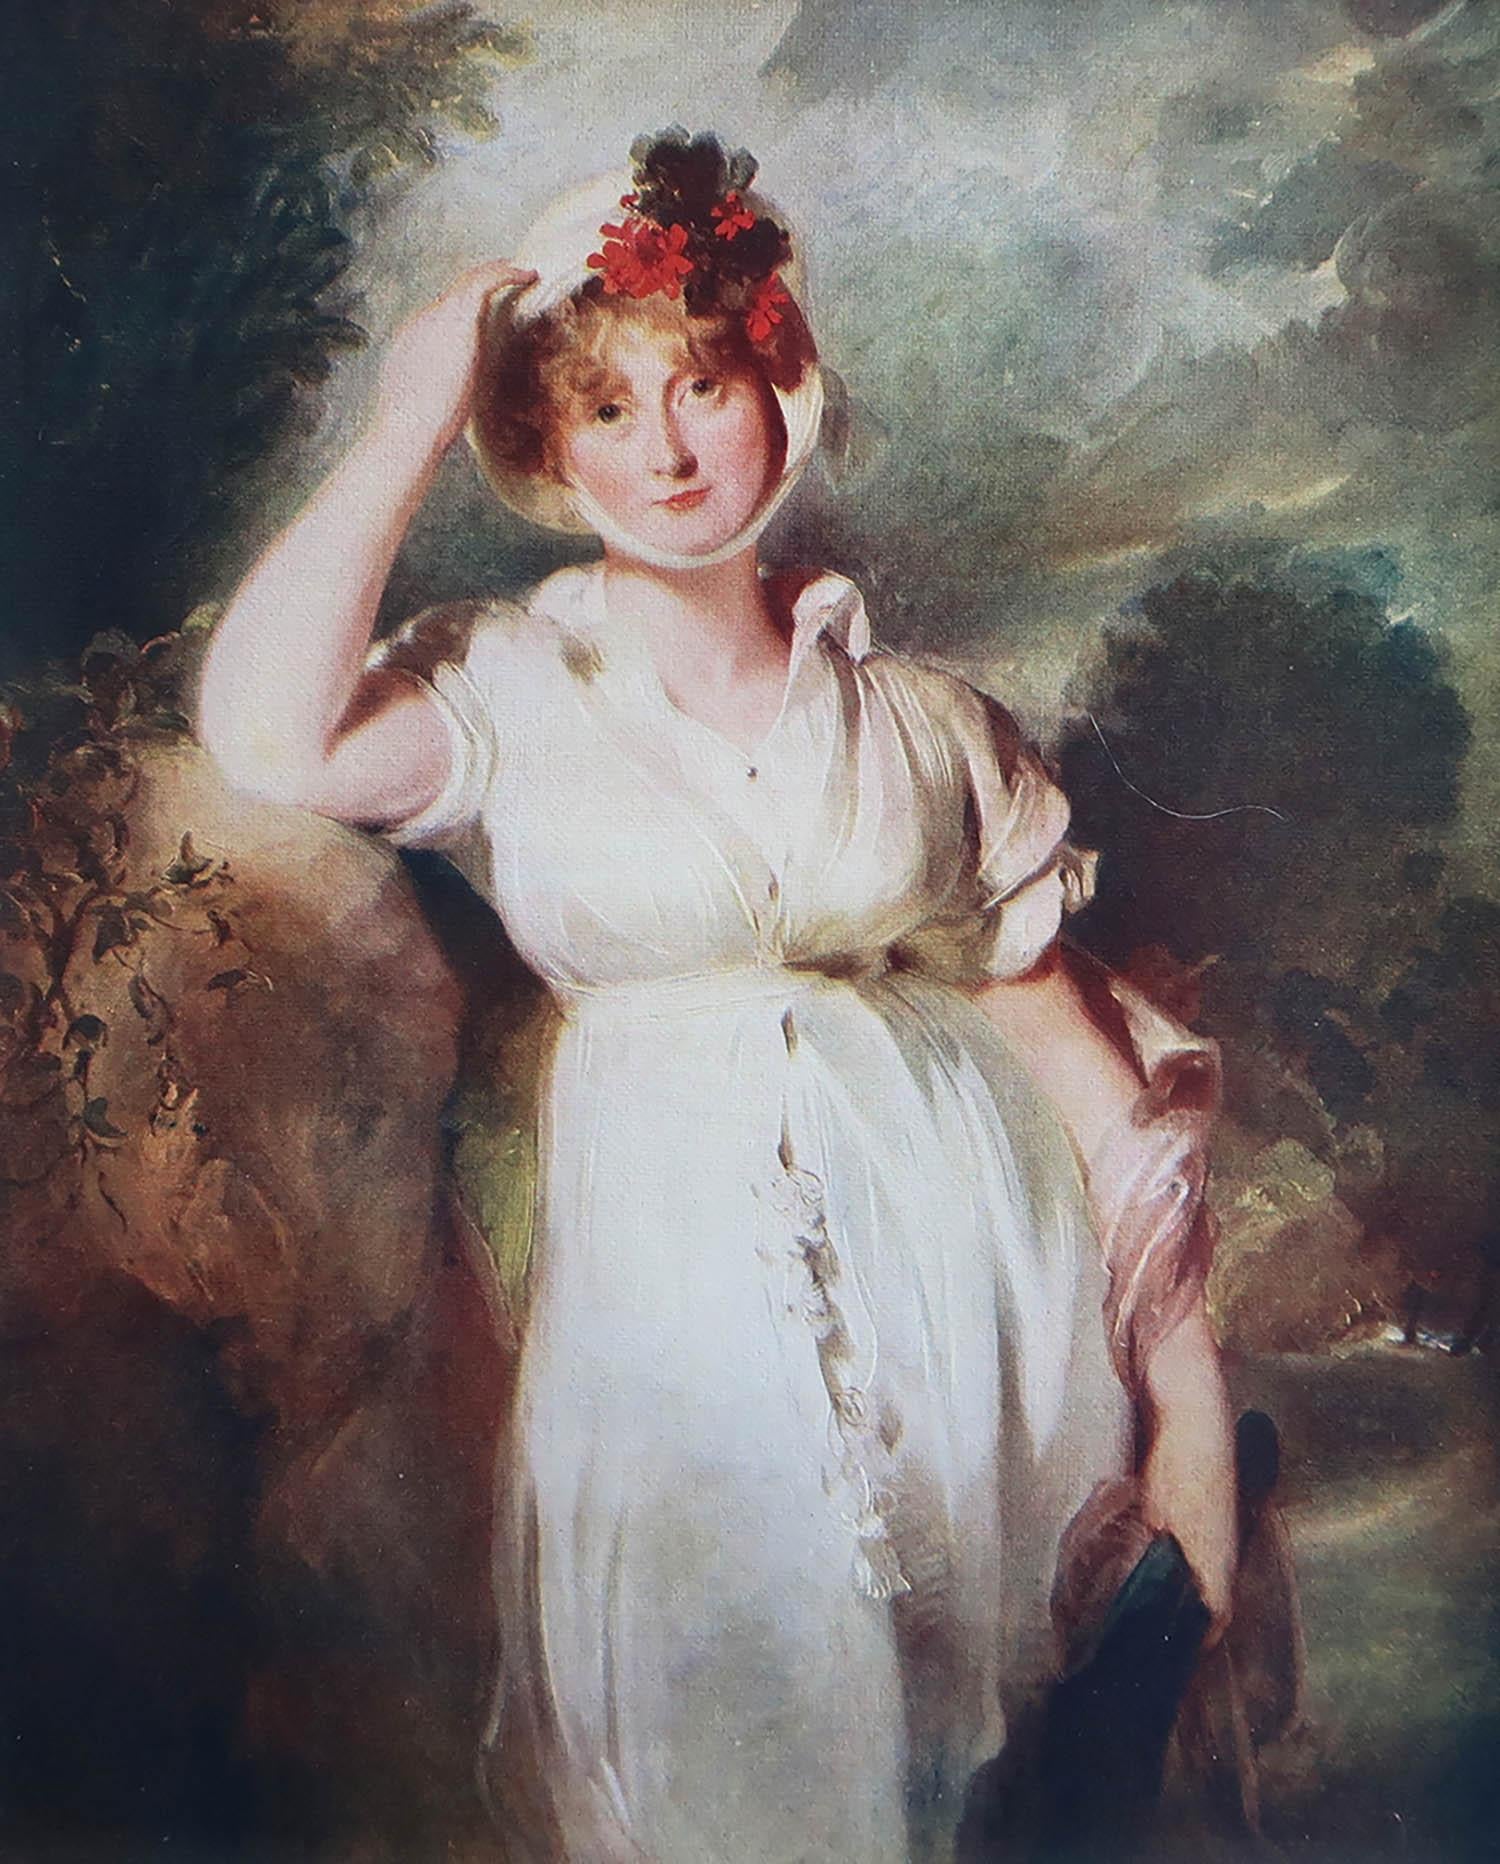 Wonderful print after Sir Thomas Lawrence

Lovely colors.

Tipped in plate on good quality paper

Chromolithograph 

Published circa 1920

The measurement given below is the off white paper size, not the actual image.

Unframed.

